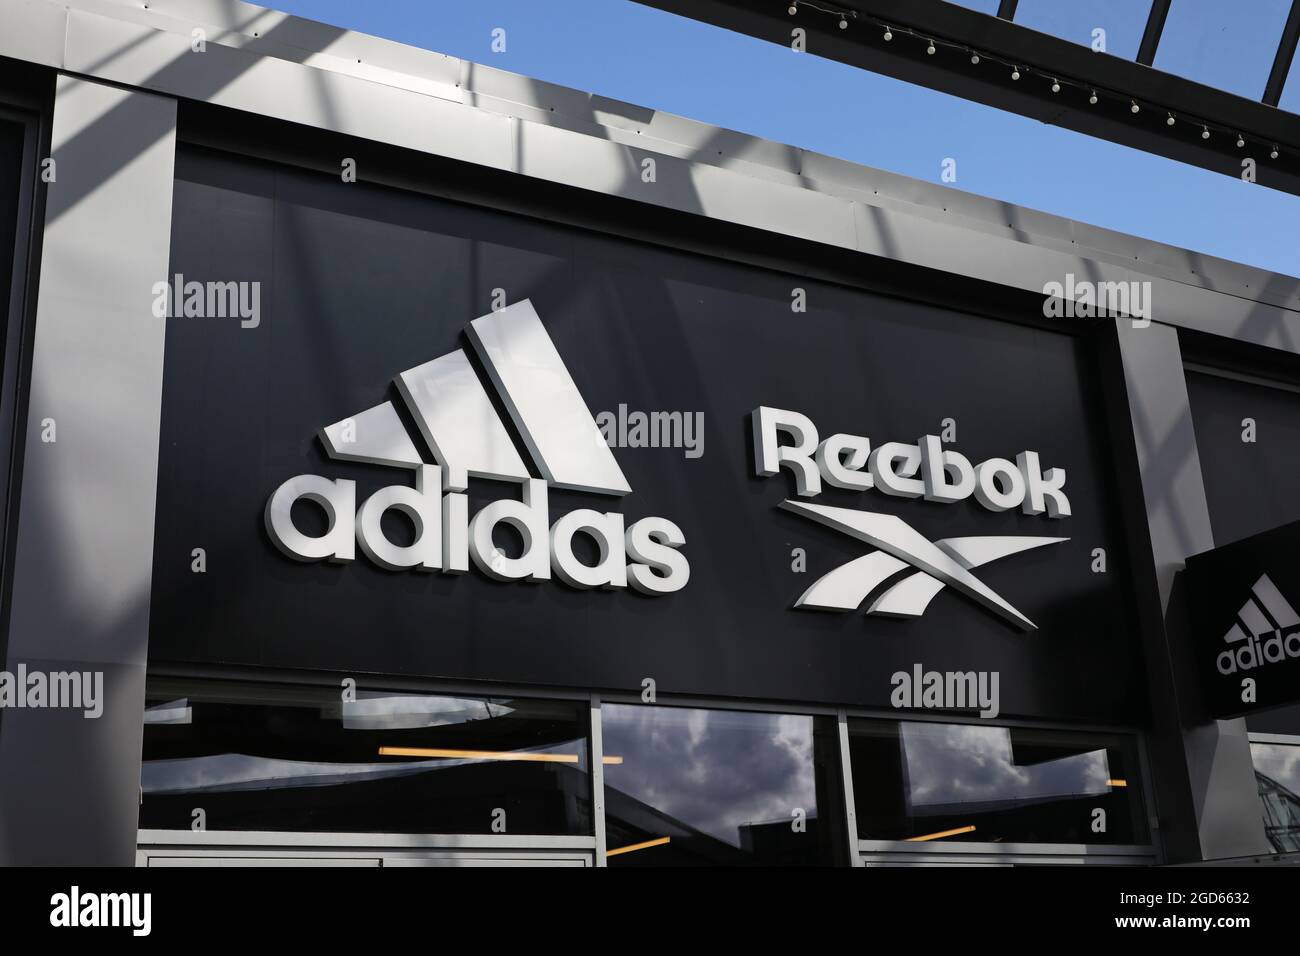 Adidas and Reebok signs at Hede Fashion Outlet Stock Photo - Alamy